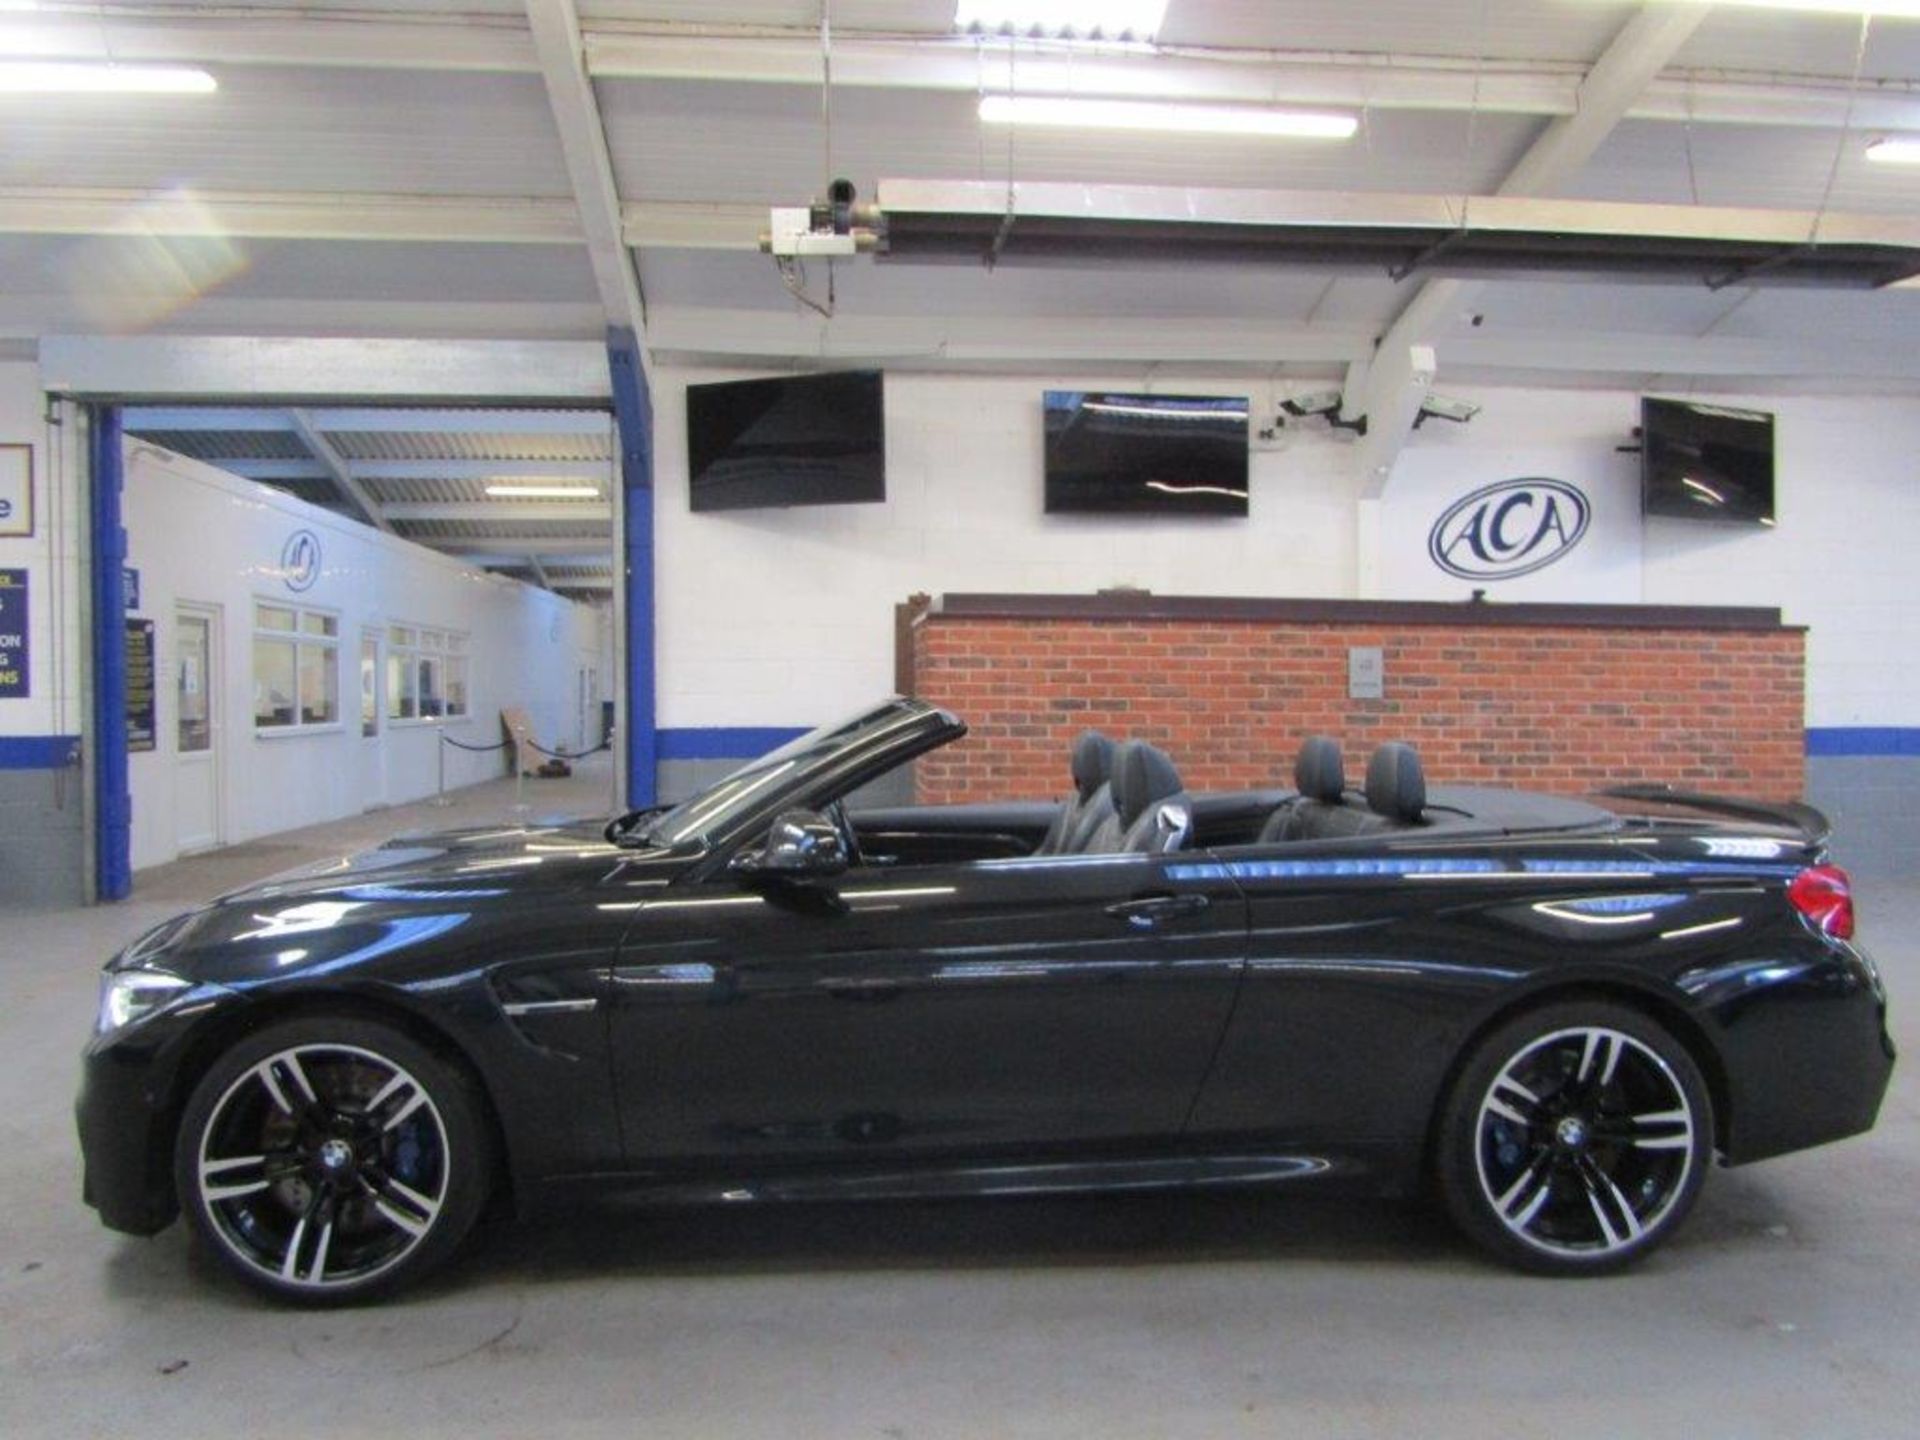 67 17 BMW M4 Convertible - Image 39 of 40